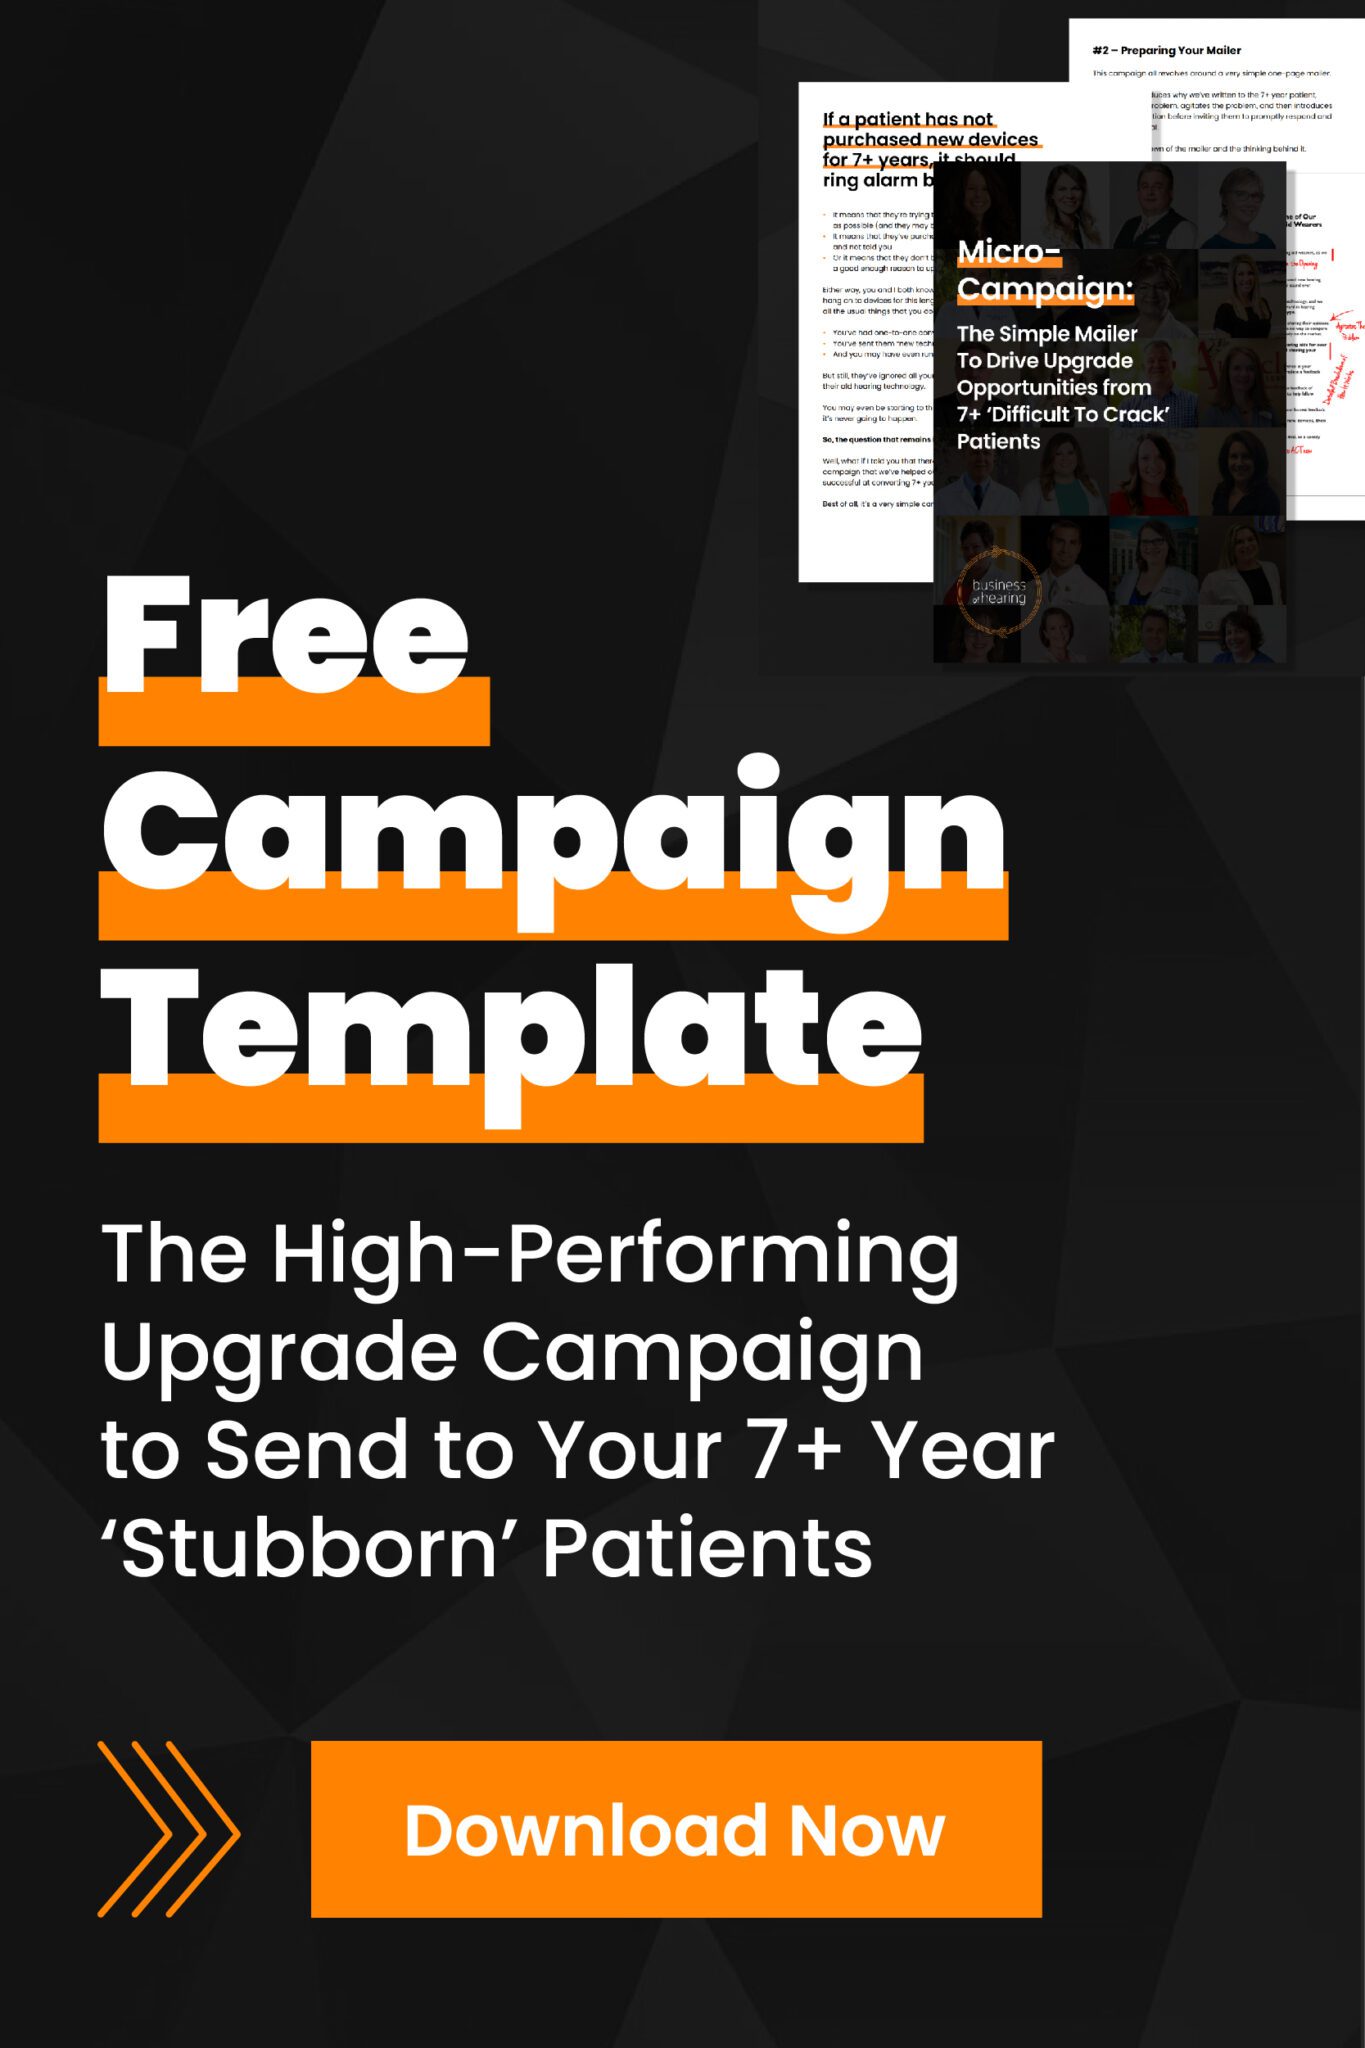 Click Here to claim your Free Campaign Template